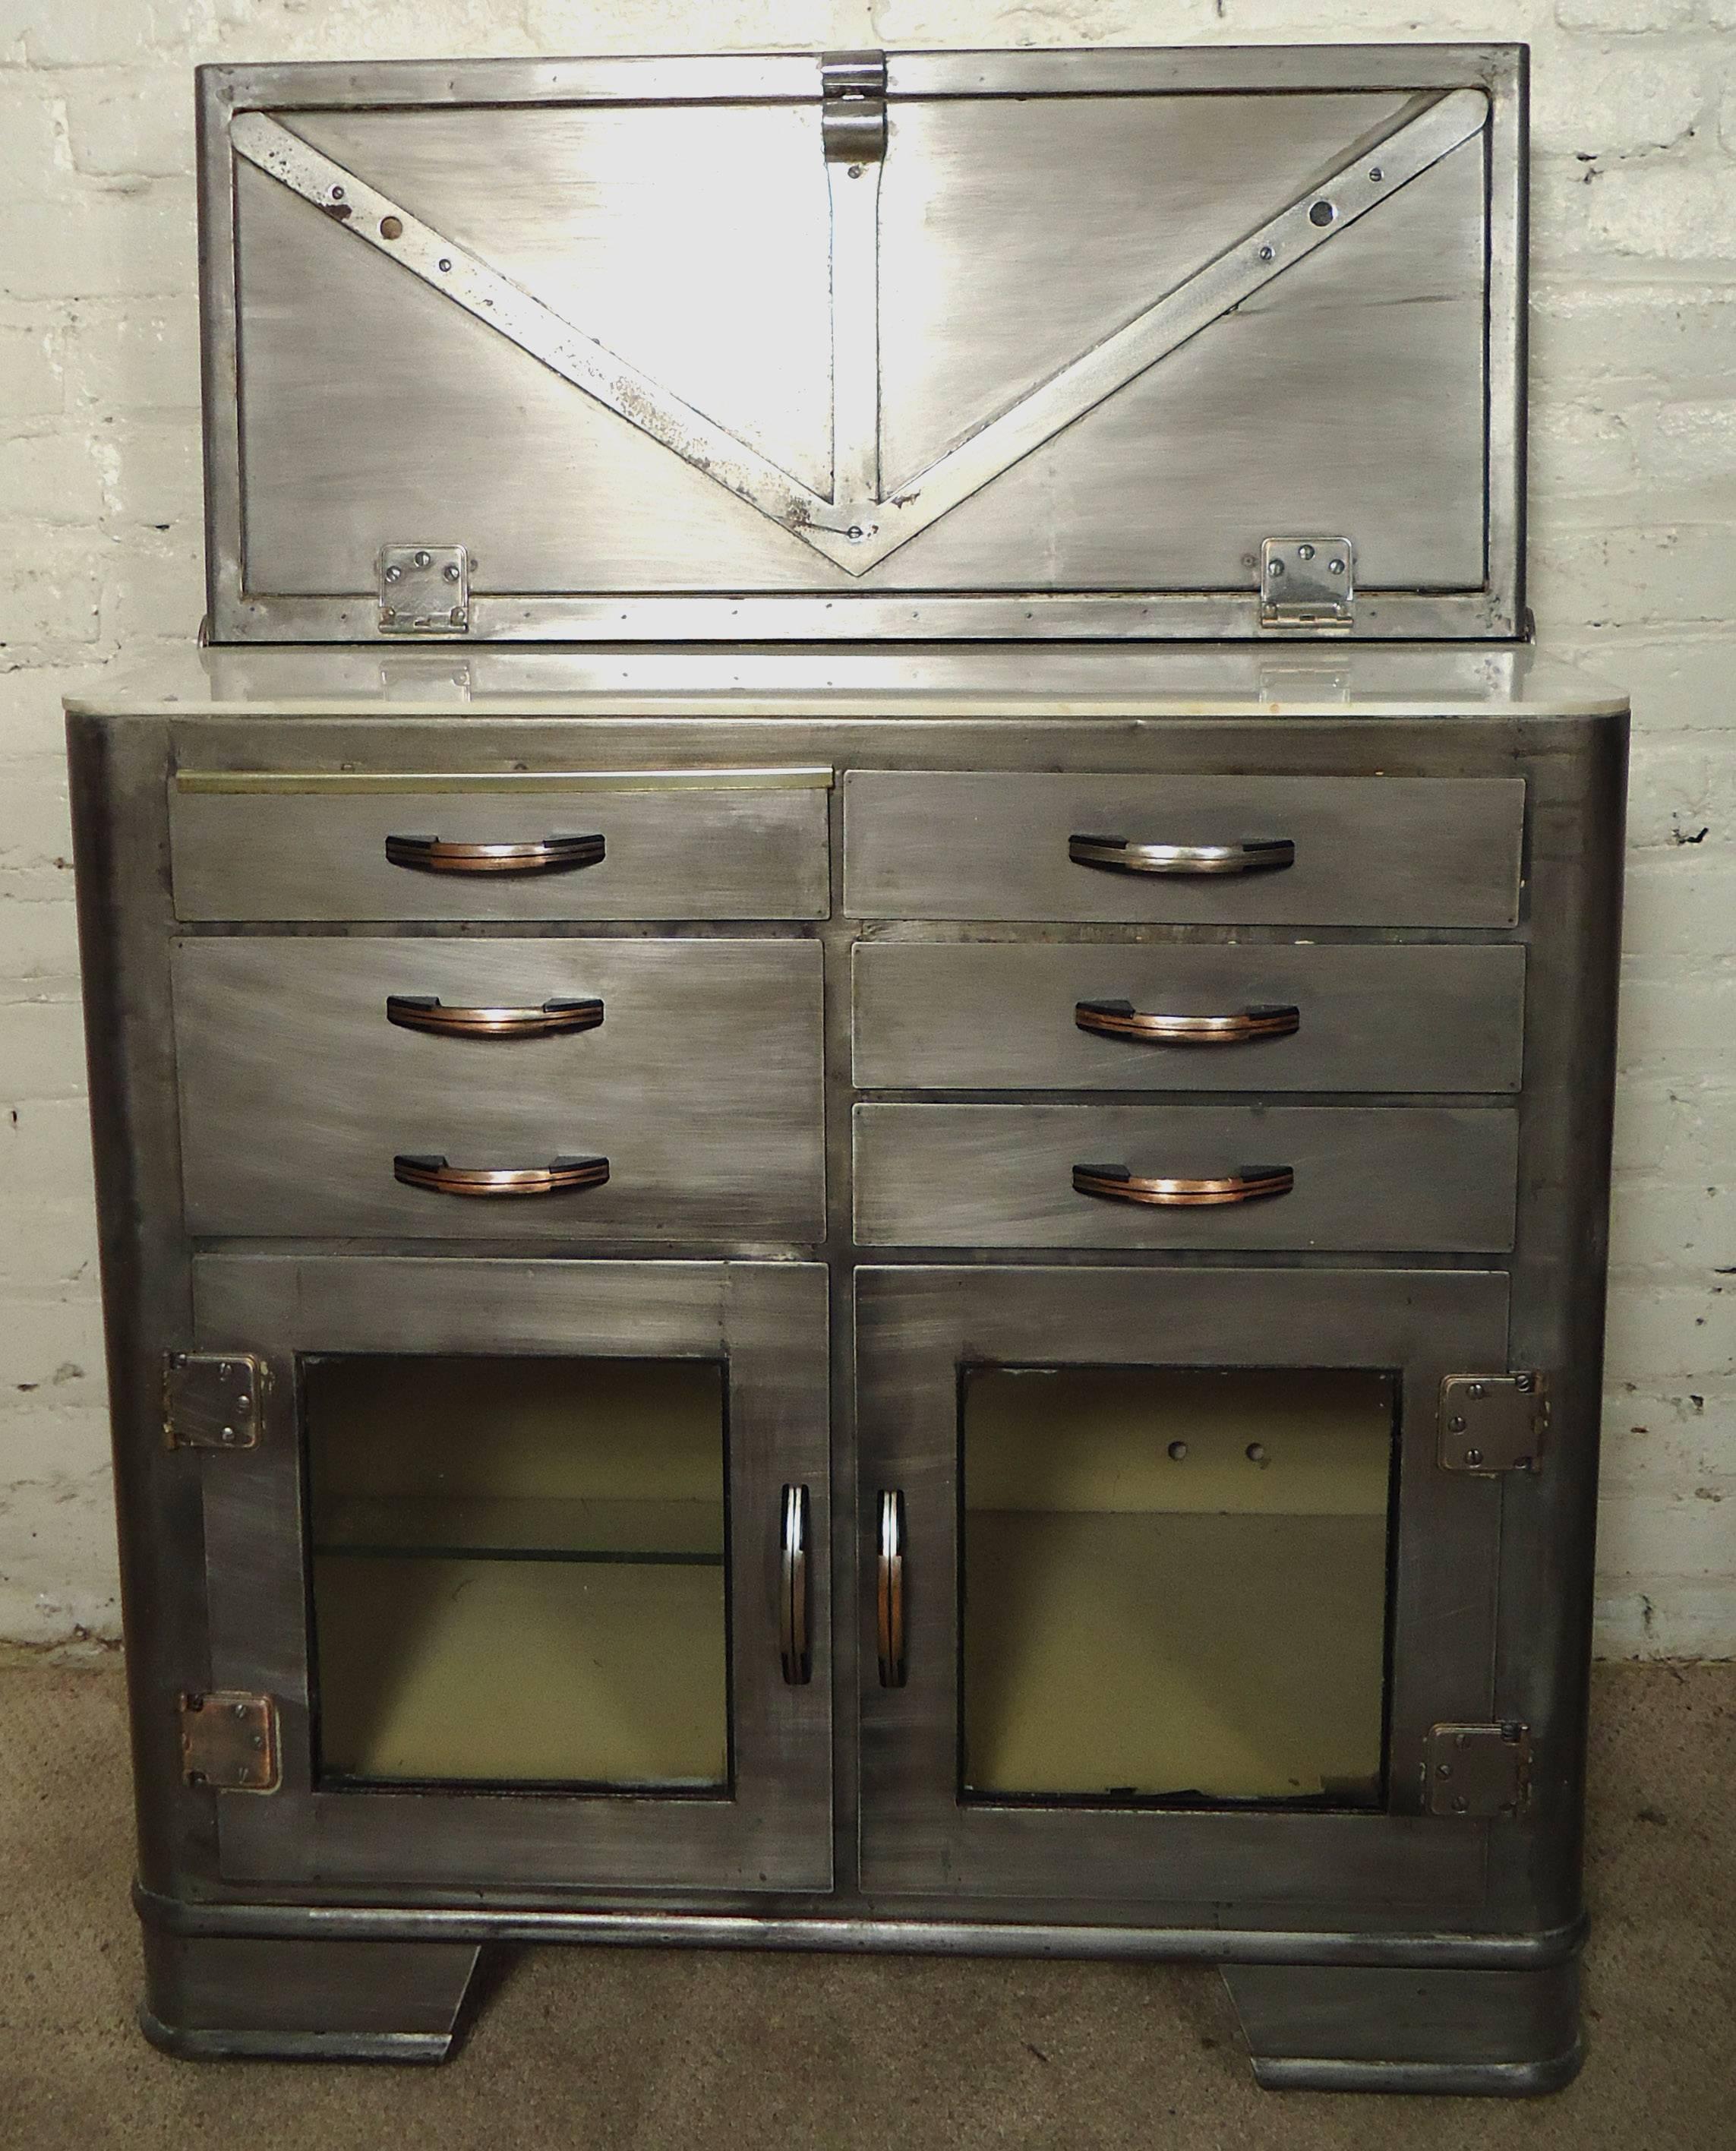 Industrial doctors cabinet, makes for a great modern kitchen or bathroom cabinet. Features drop down front with storage, bottom drawers and glass doors.

(Please confirm item location - NY or NJ - with dealer)
